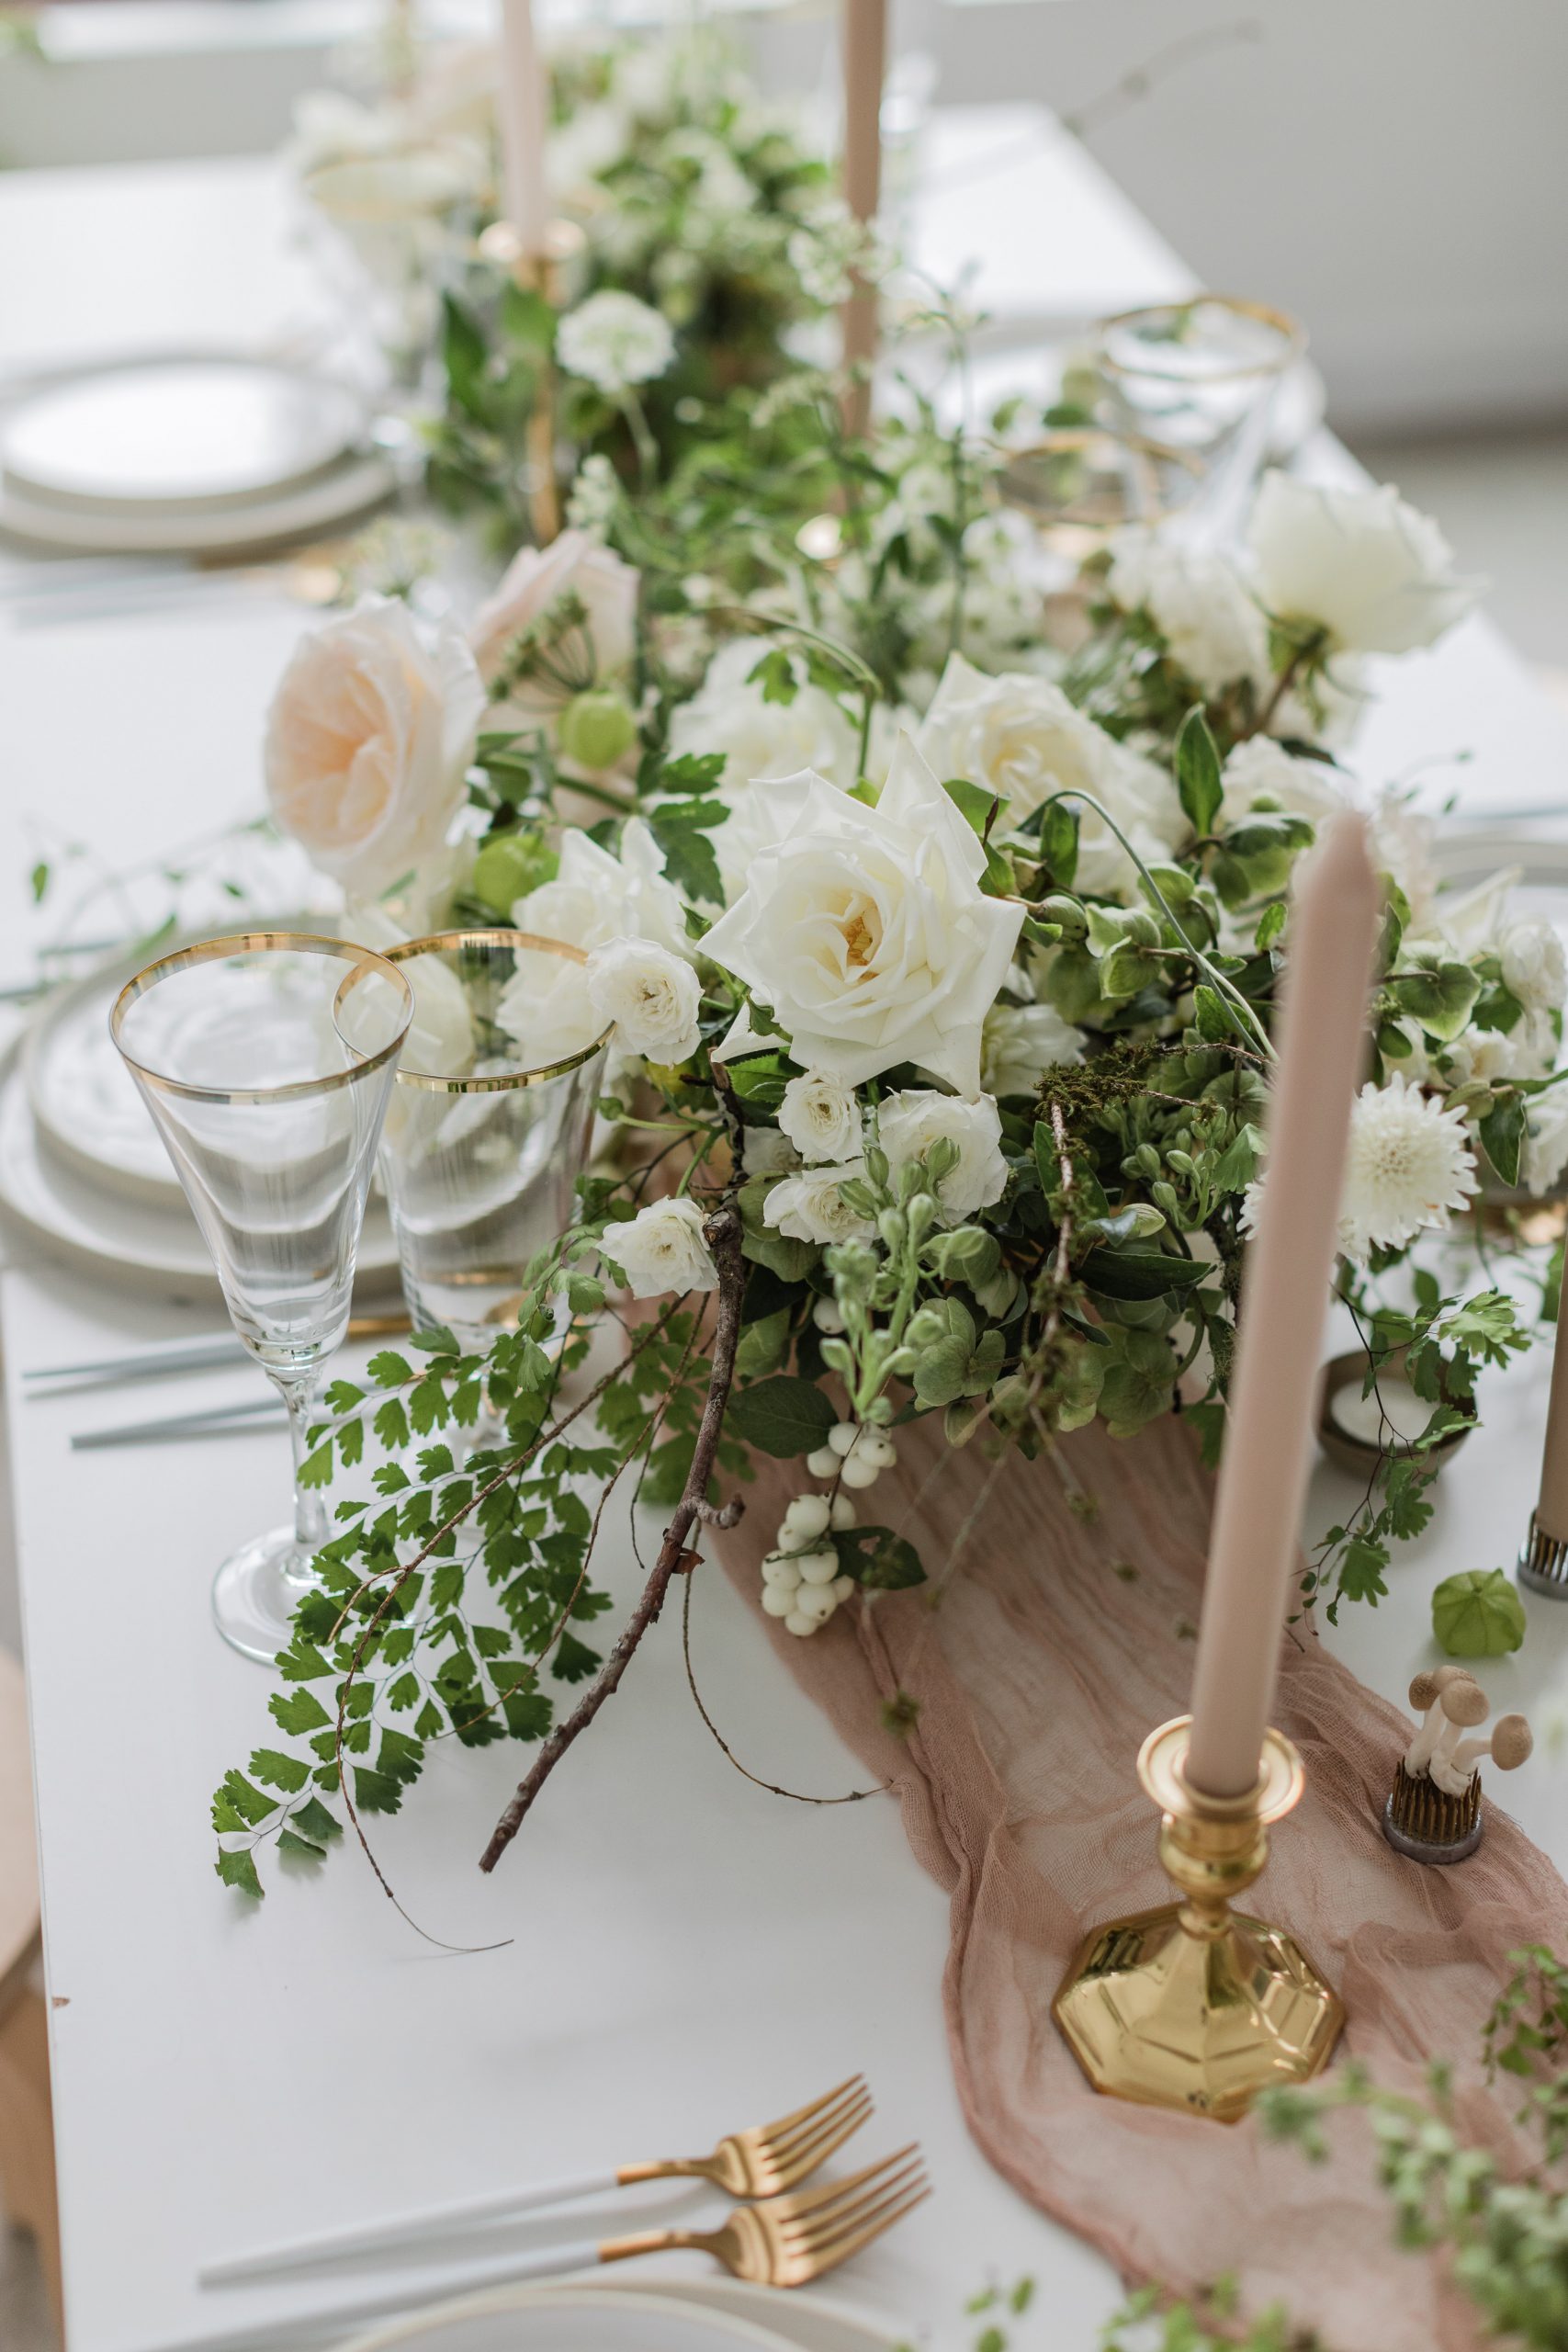 A long white wedding table with white florals, a neutral table runner, candles, and place settings